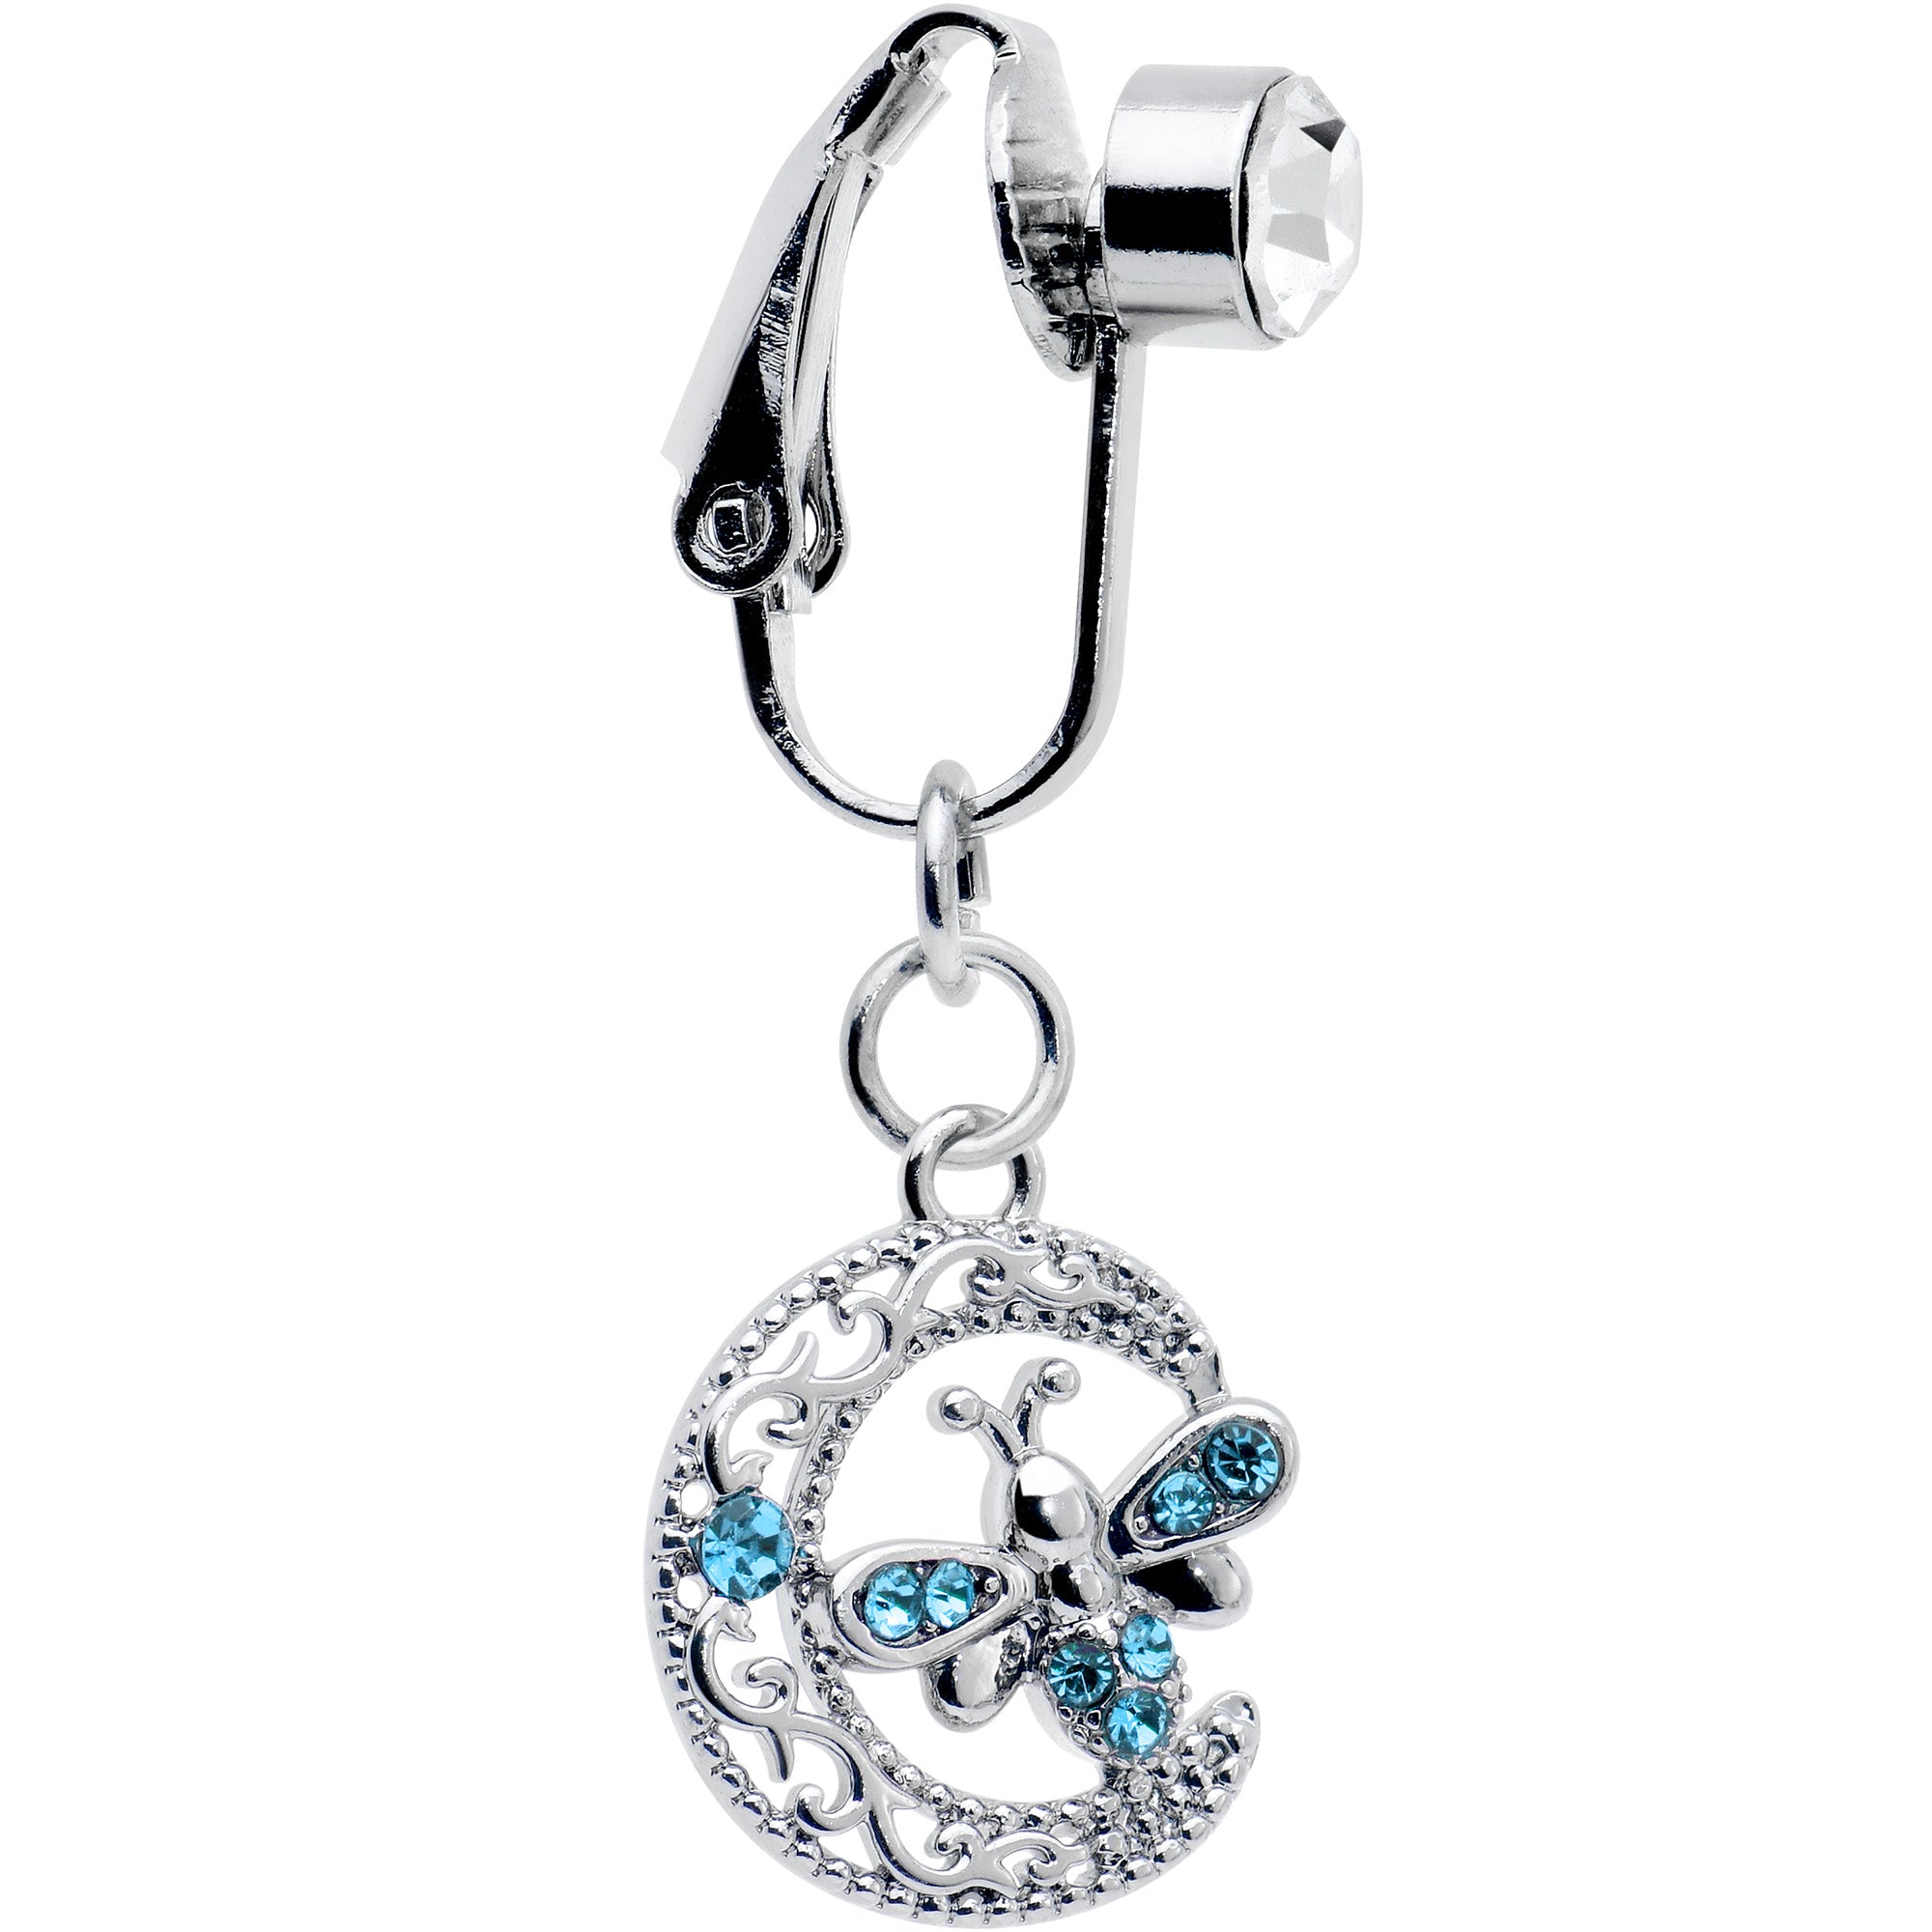 any idea on how to make this less painful? i got this fake belly ring  because im not allowed a belly piercing, does anyone have any advice on how  to make this